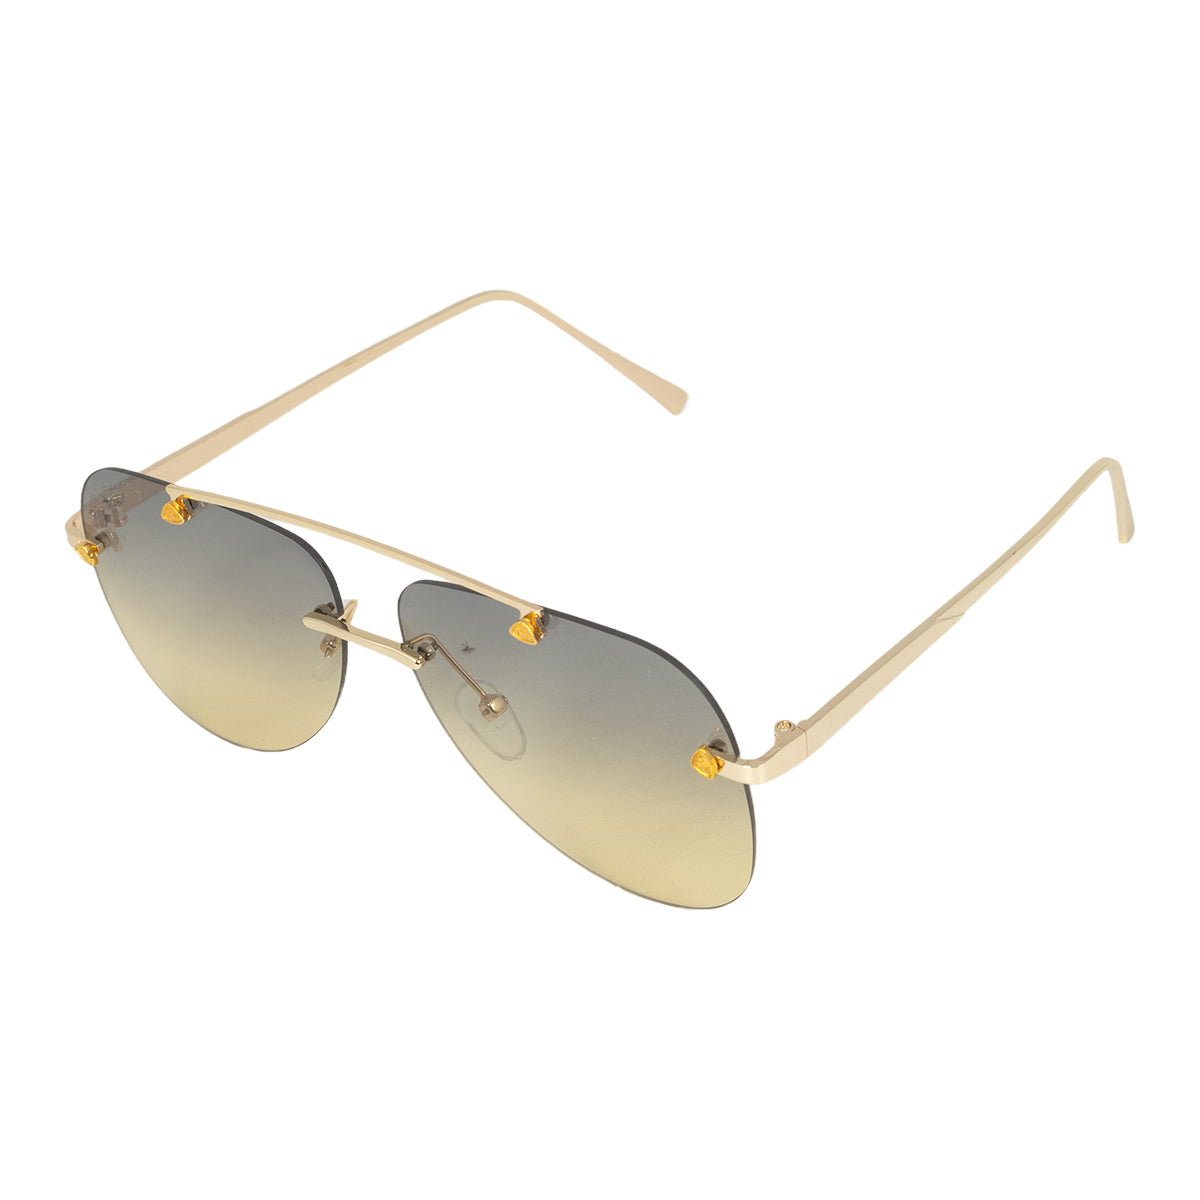 Buy AISLIN® Mirrored Unisex Aviator Sunglasses - (Mirror Red-Gold Lens | Gold  Frame | Medium Size | RB3205 | AS3025) at Amazon.in